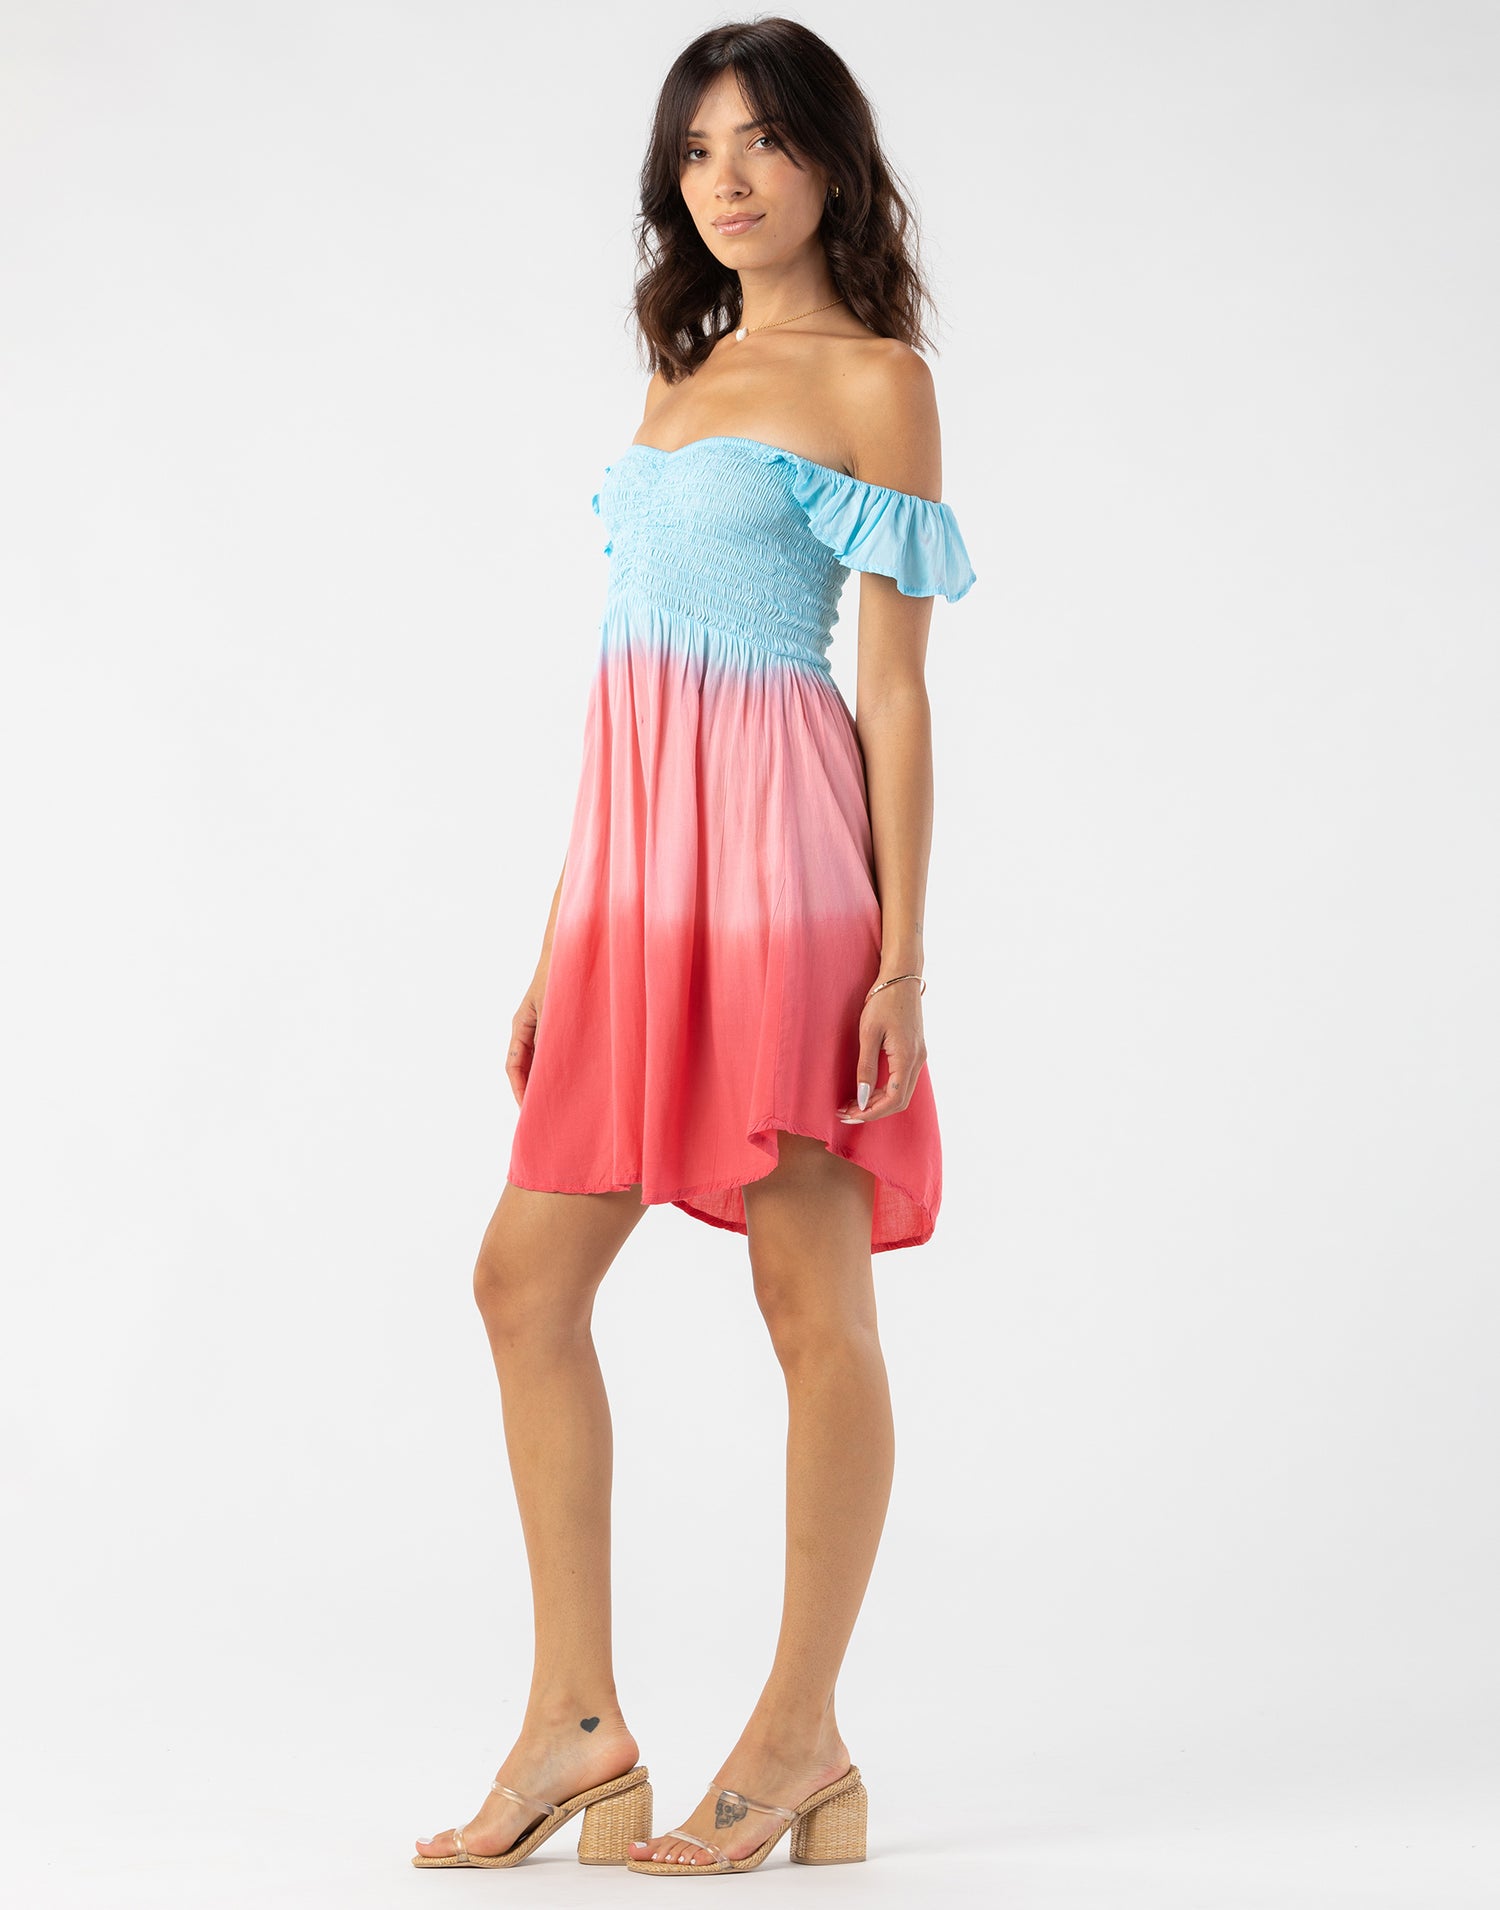 Hollie Mini Dress by Tiare Hawaii in Aqua Coral Ombre - Angled View